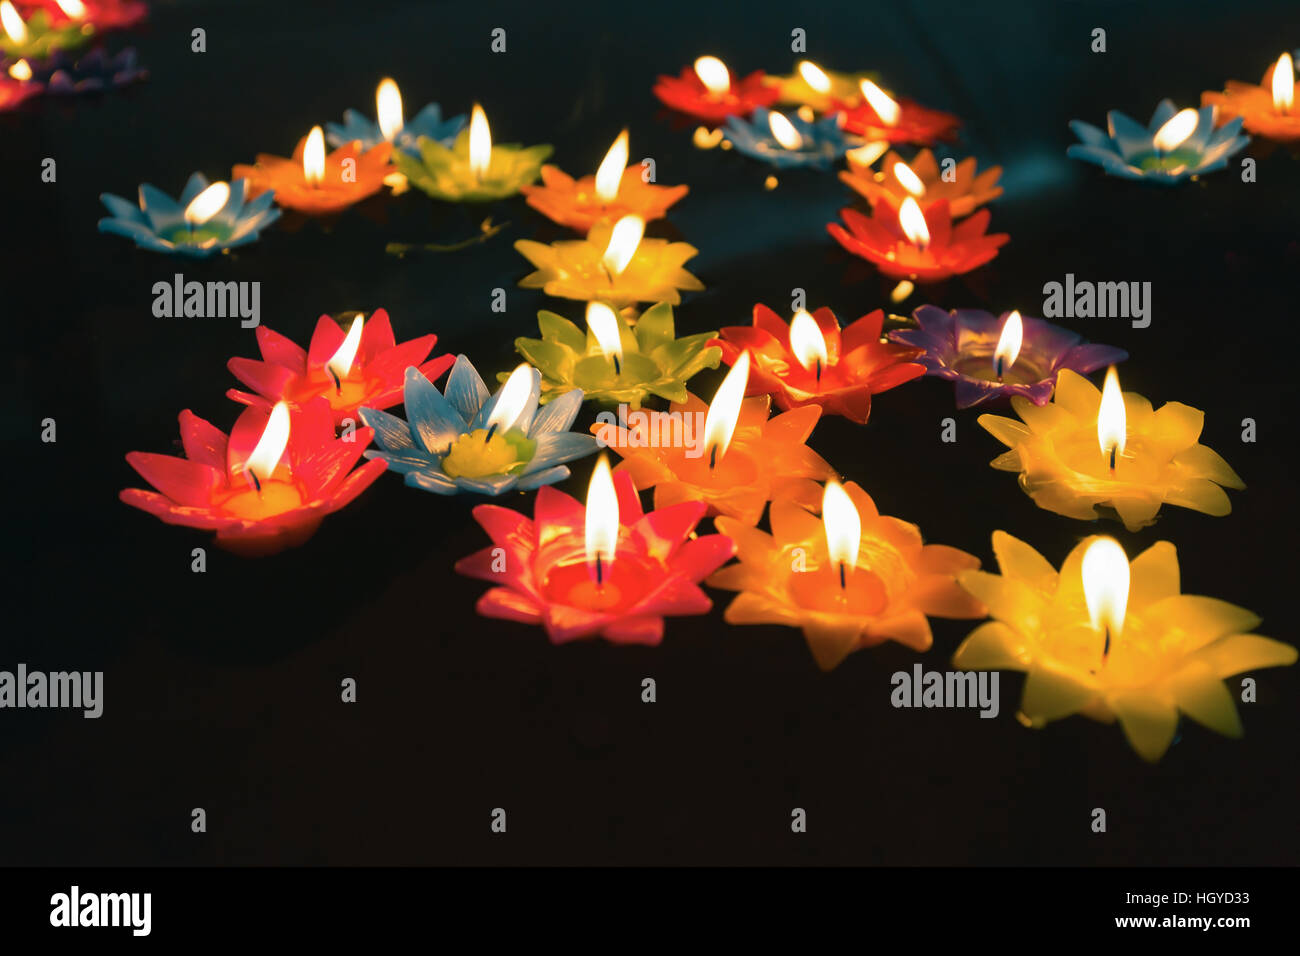 Close focus on colorful candles with fire floating on oil pool in low key tone. People float candles for lucky wishing. Stock Photo